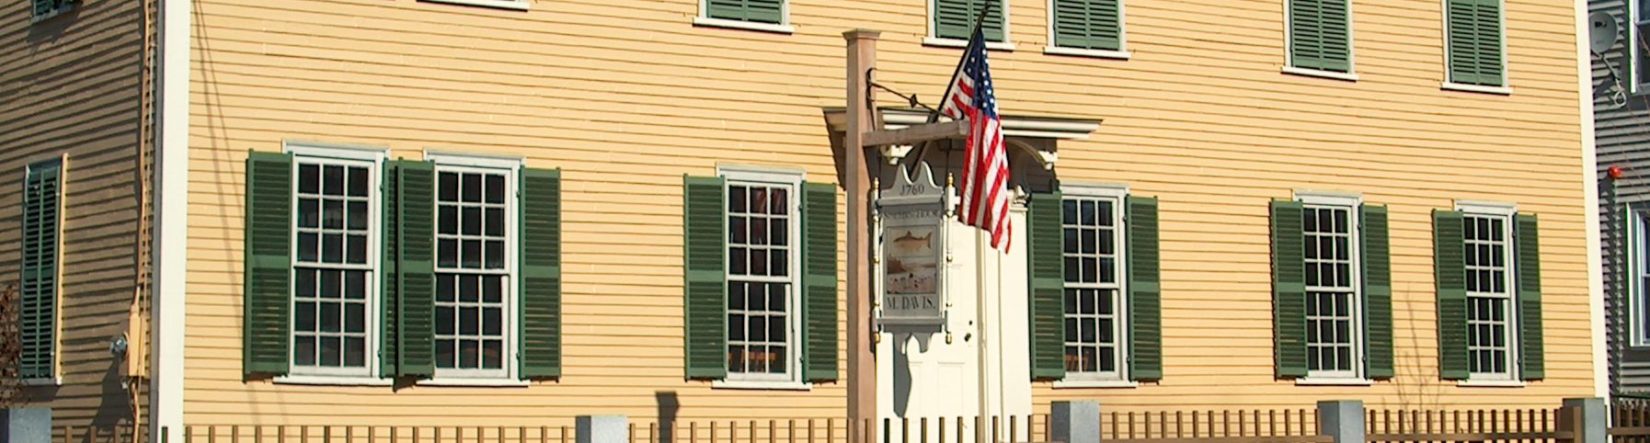 spalding house, historic yellow house with dark green shutters, an American flag and sign hanging